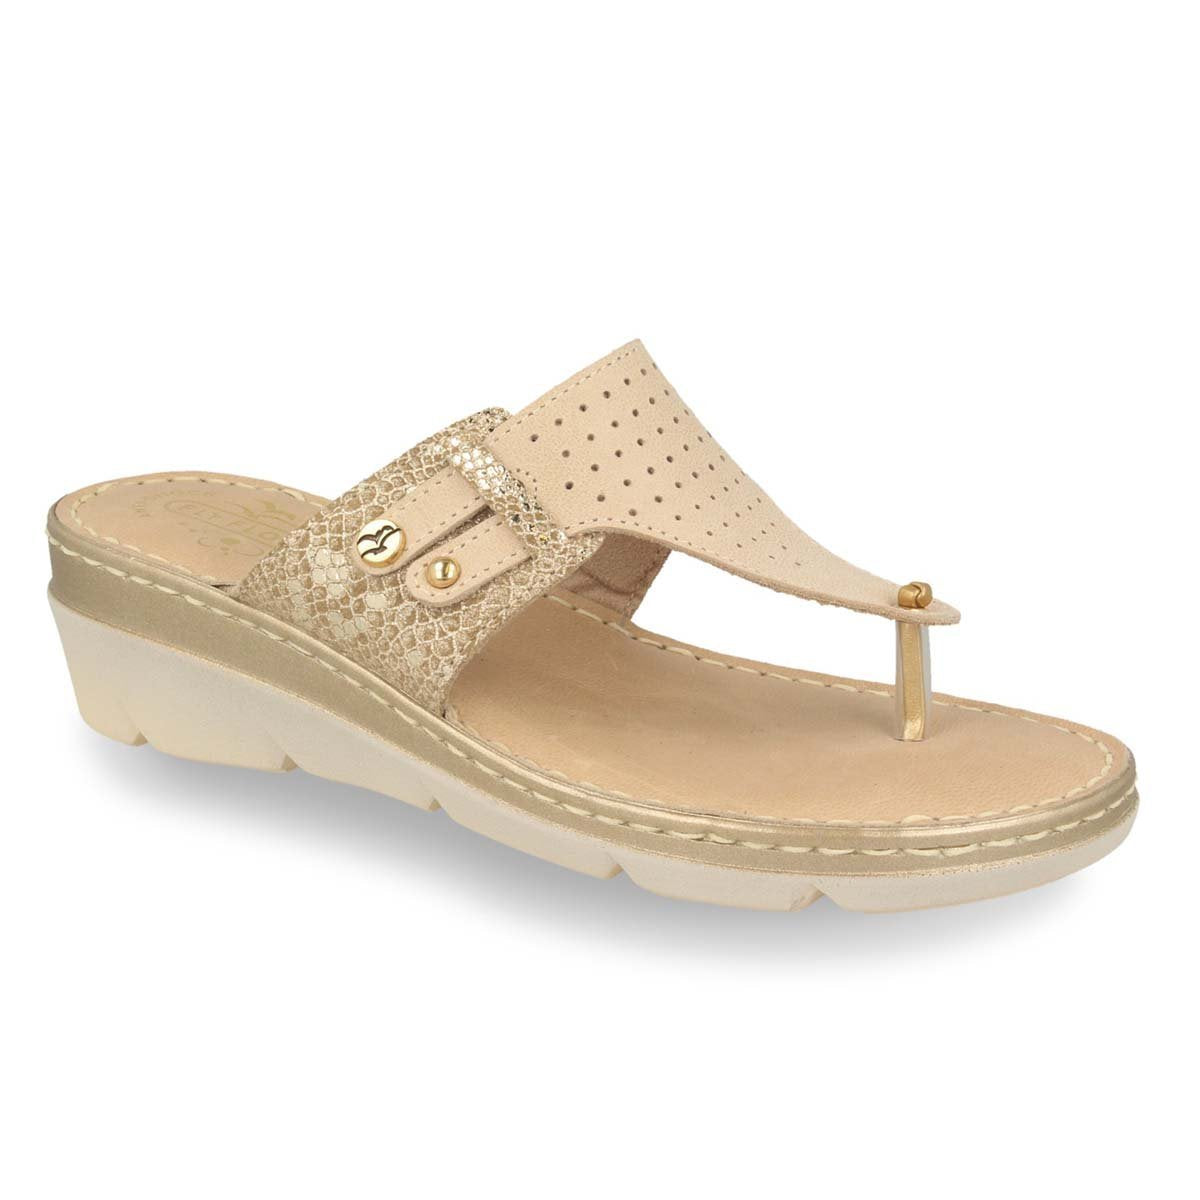 See the Leather Open Toe Flip Flops Women Sandals With Anti-Shock Cushioned Leather Insole in the colour BEIGE, available in various sizes